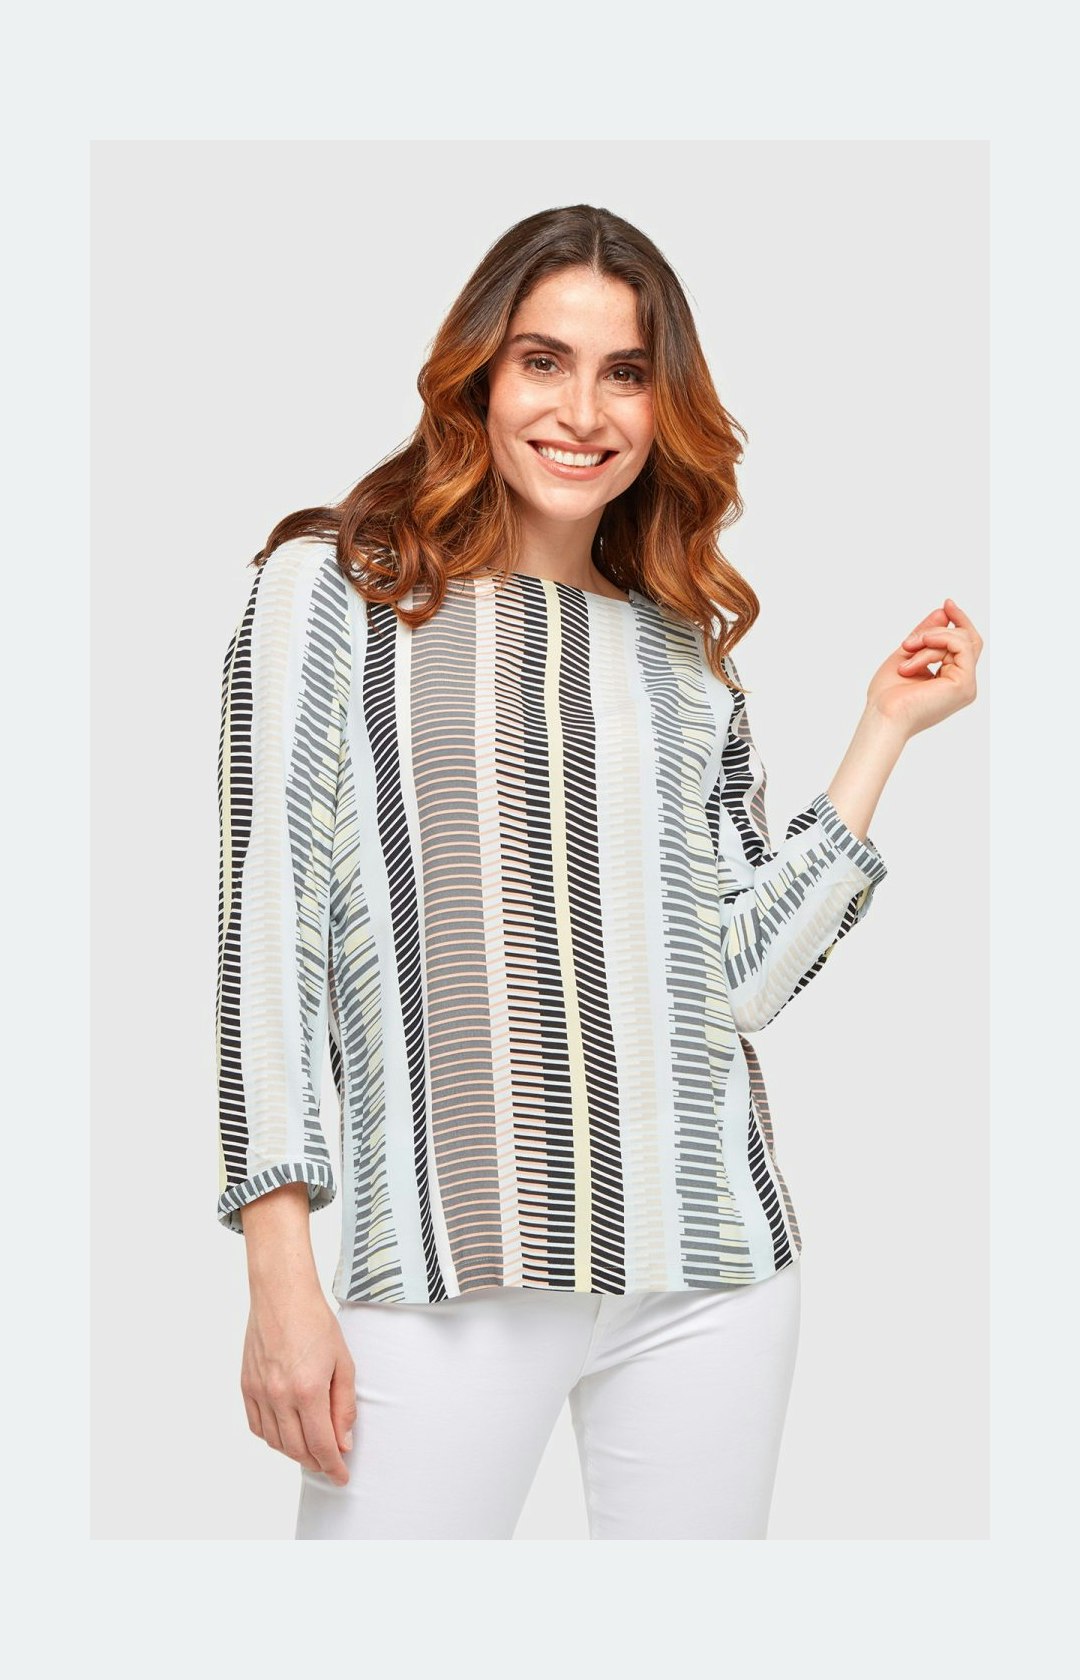 Bluse mit Allover-Muster